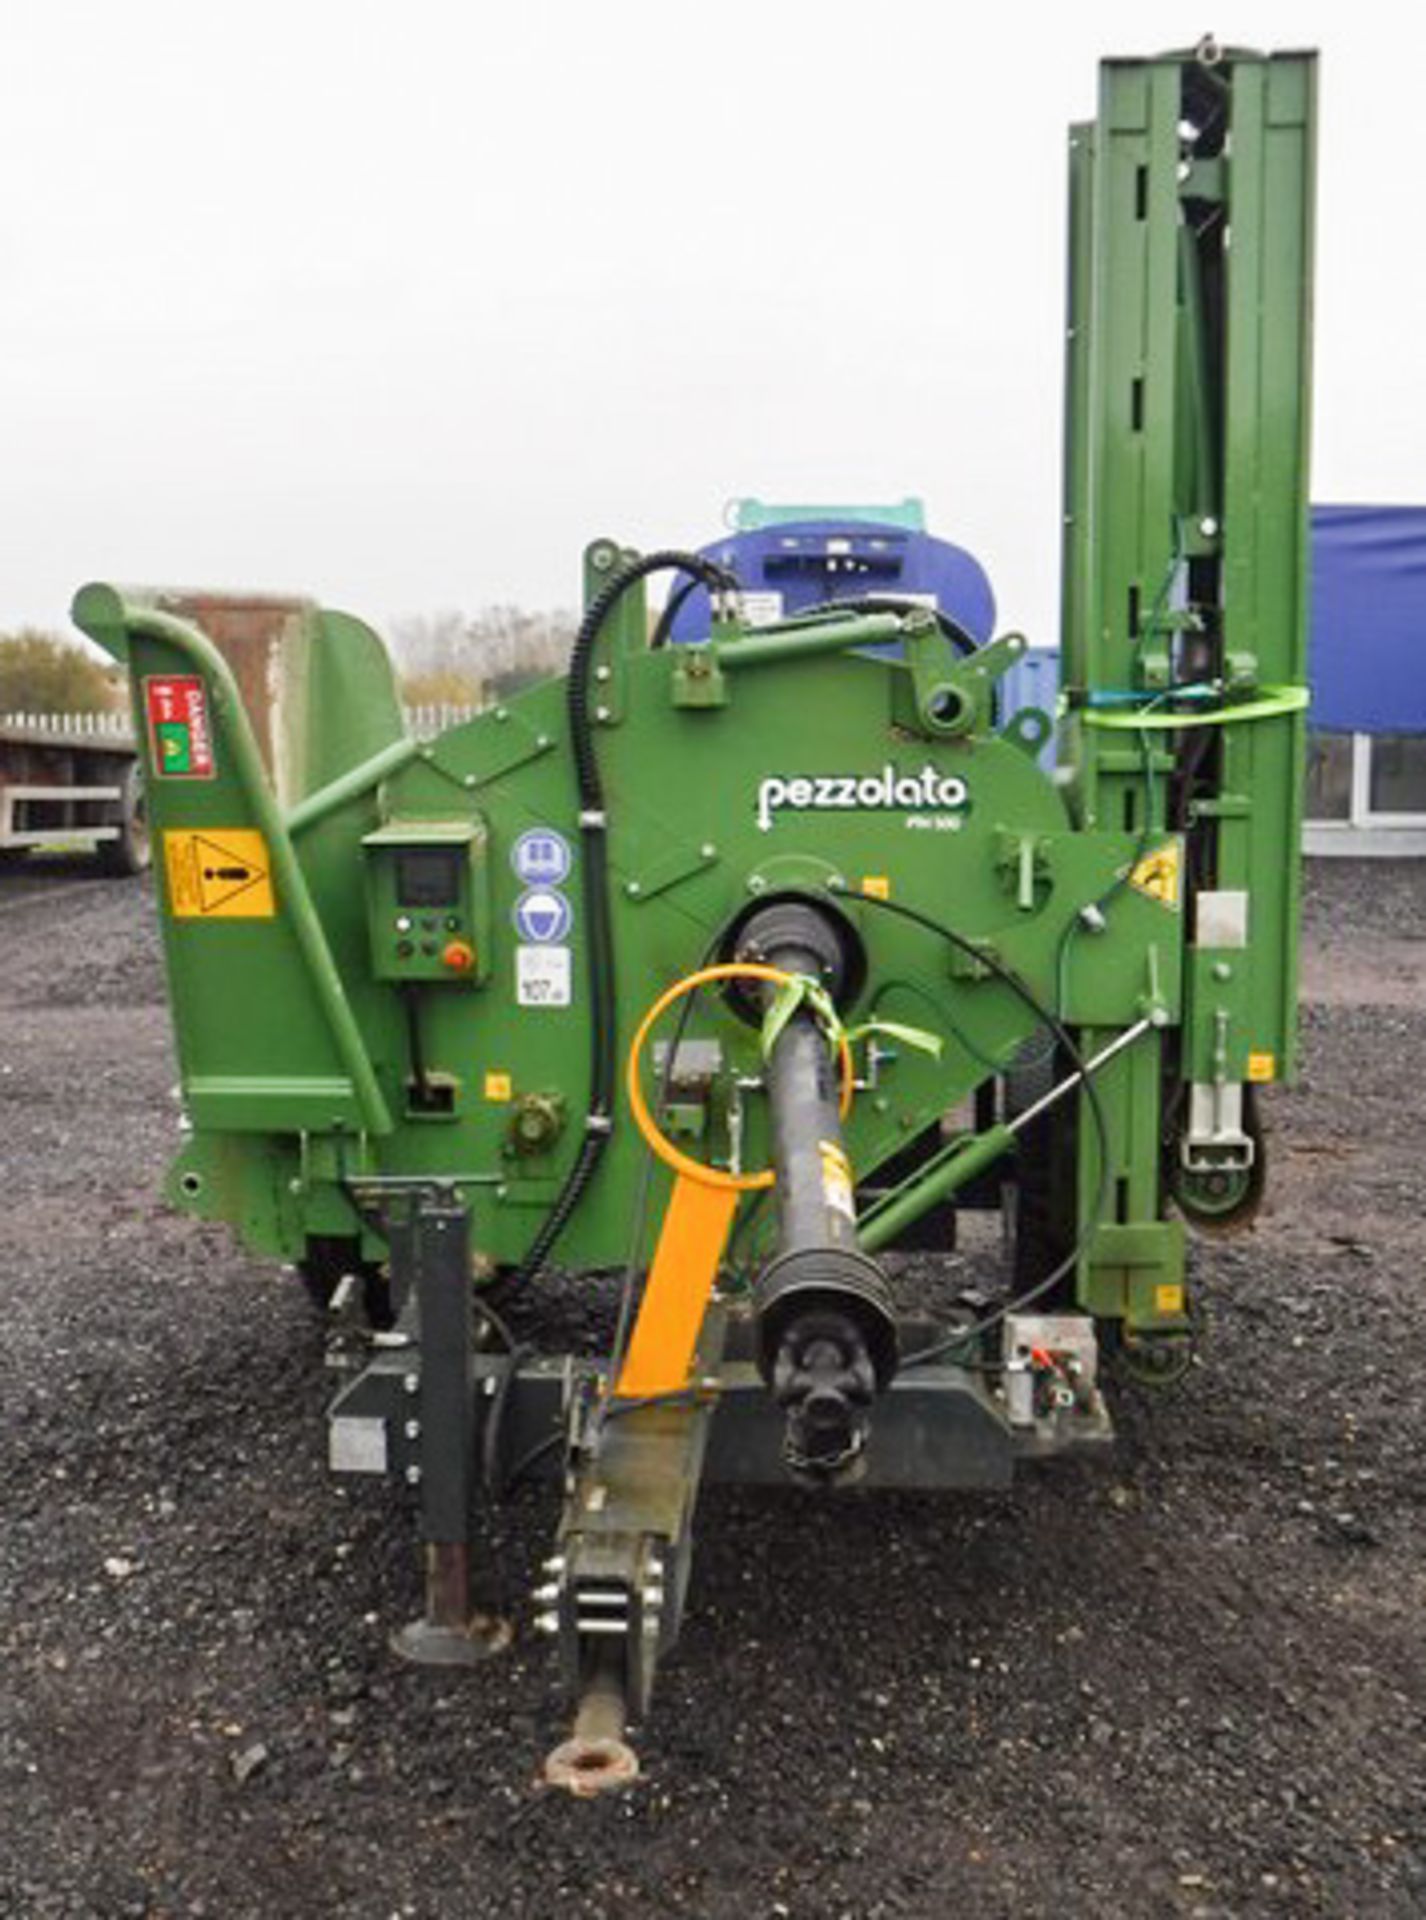 2016 PEZZOLATO PTH 500 WOOD CHIPPER WITH LOADING CONVEYOR BELT, S/N C16188, DETAILS OF REMOTE ETC IN - Image 7 of 11